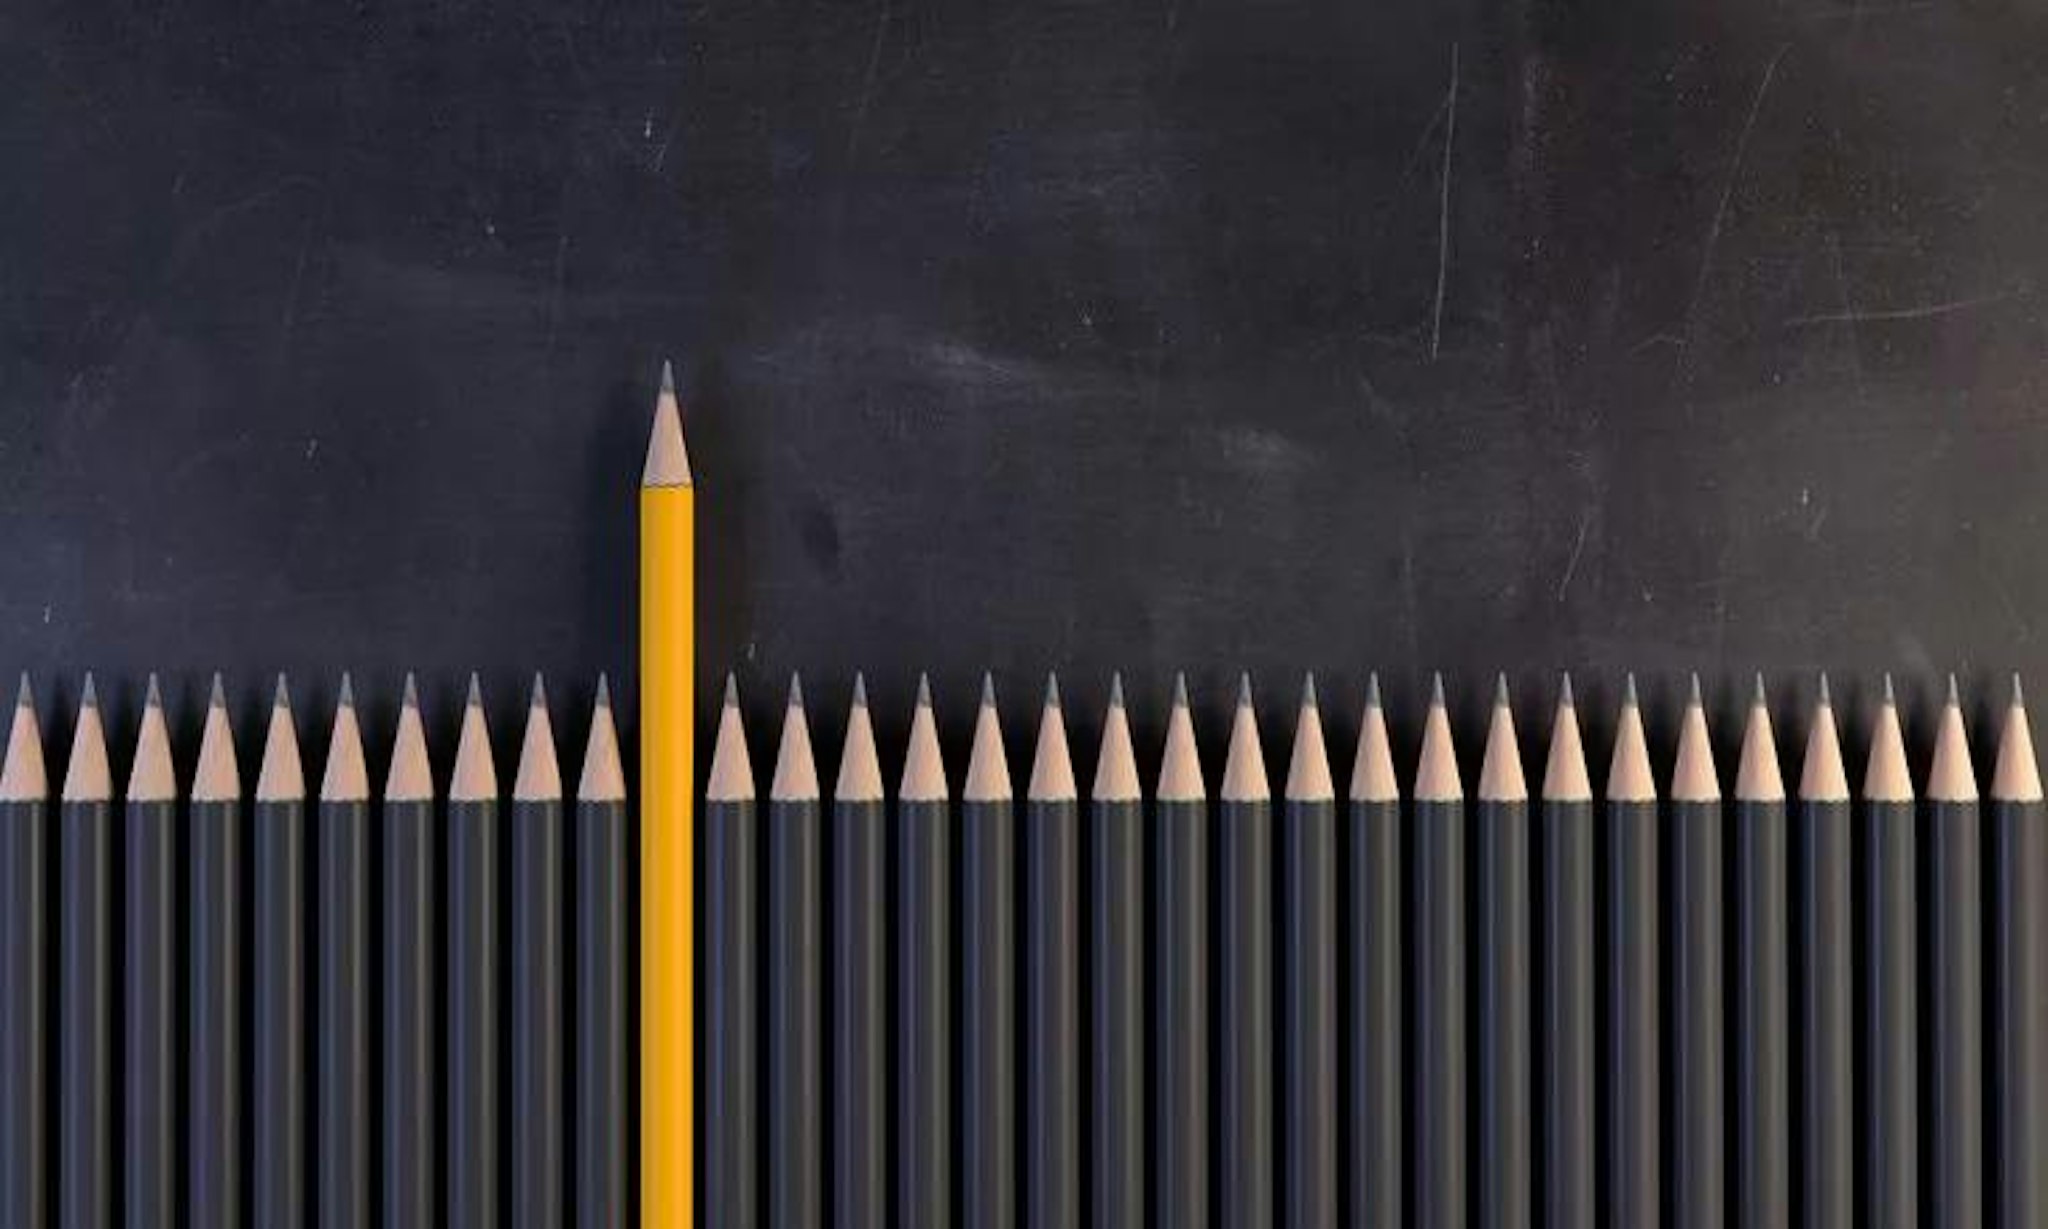 School pencils lined up with one yellow pencil. Image represents student success.